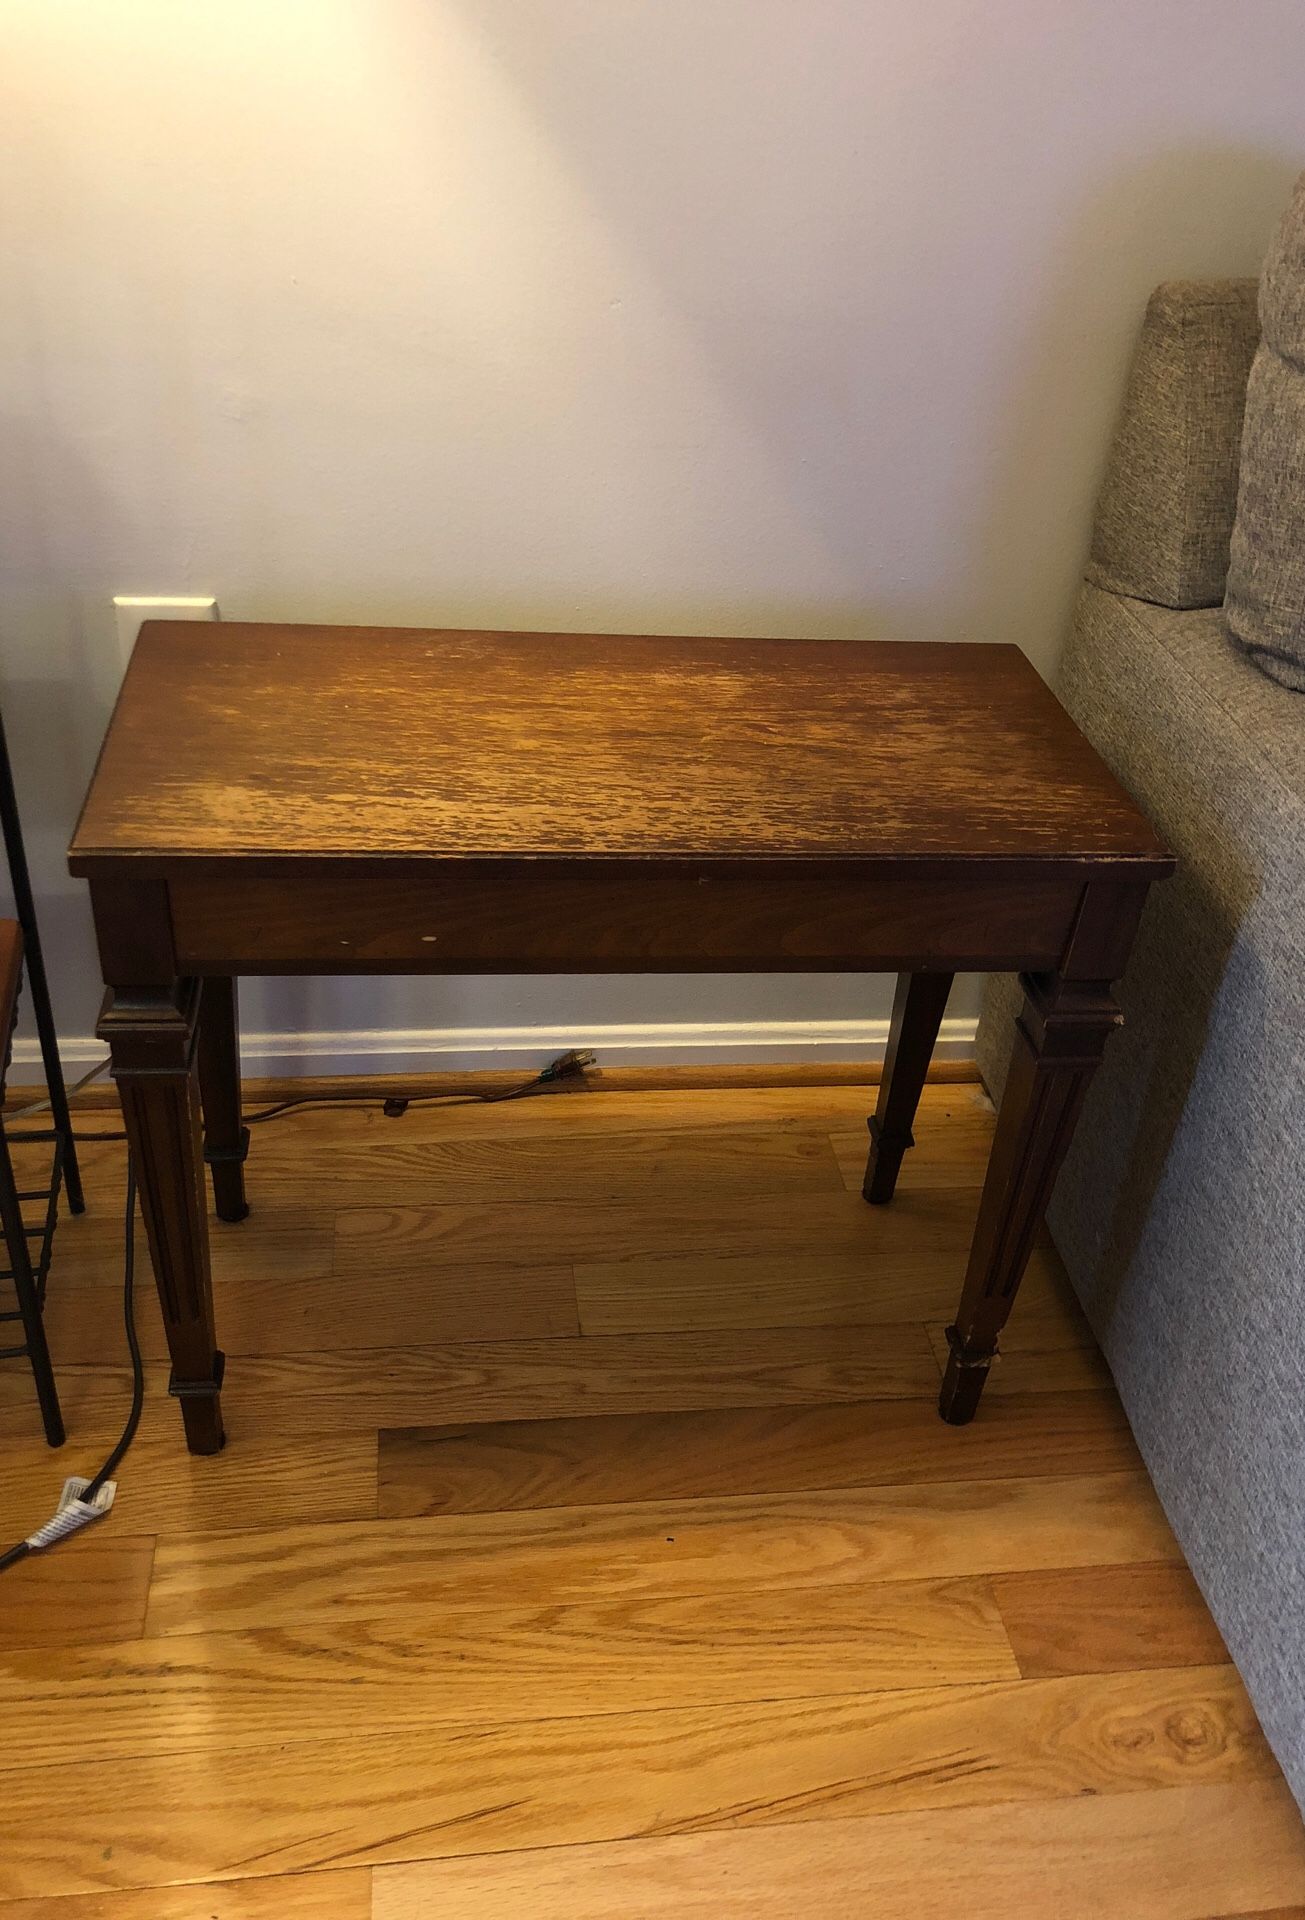 Piano bench/side table